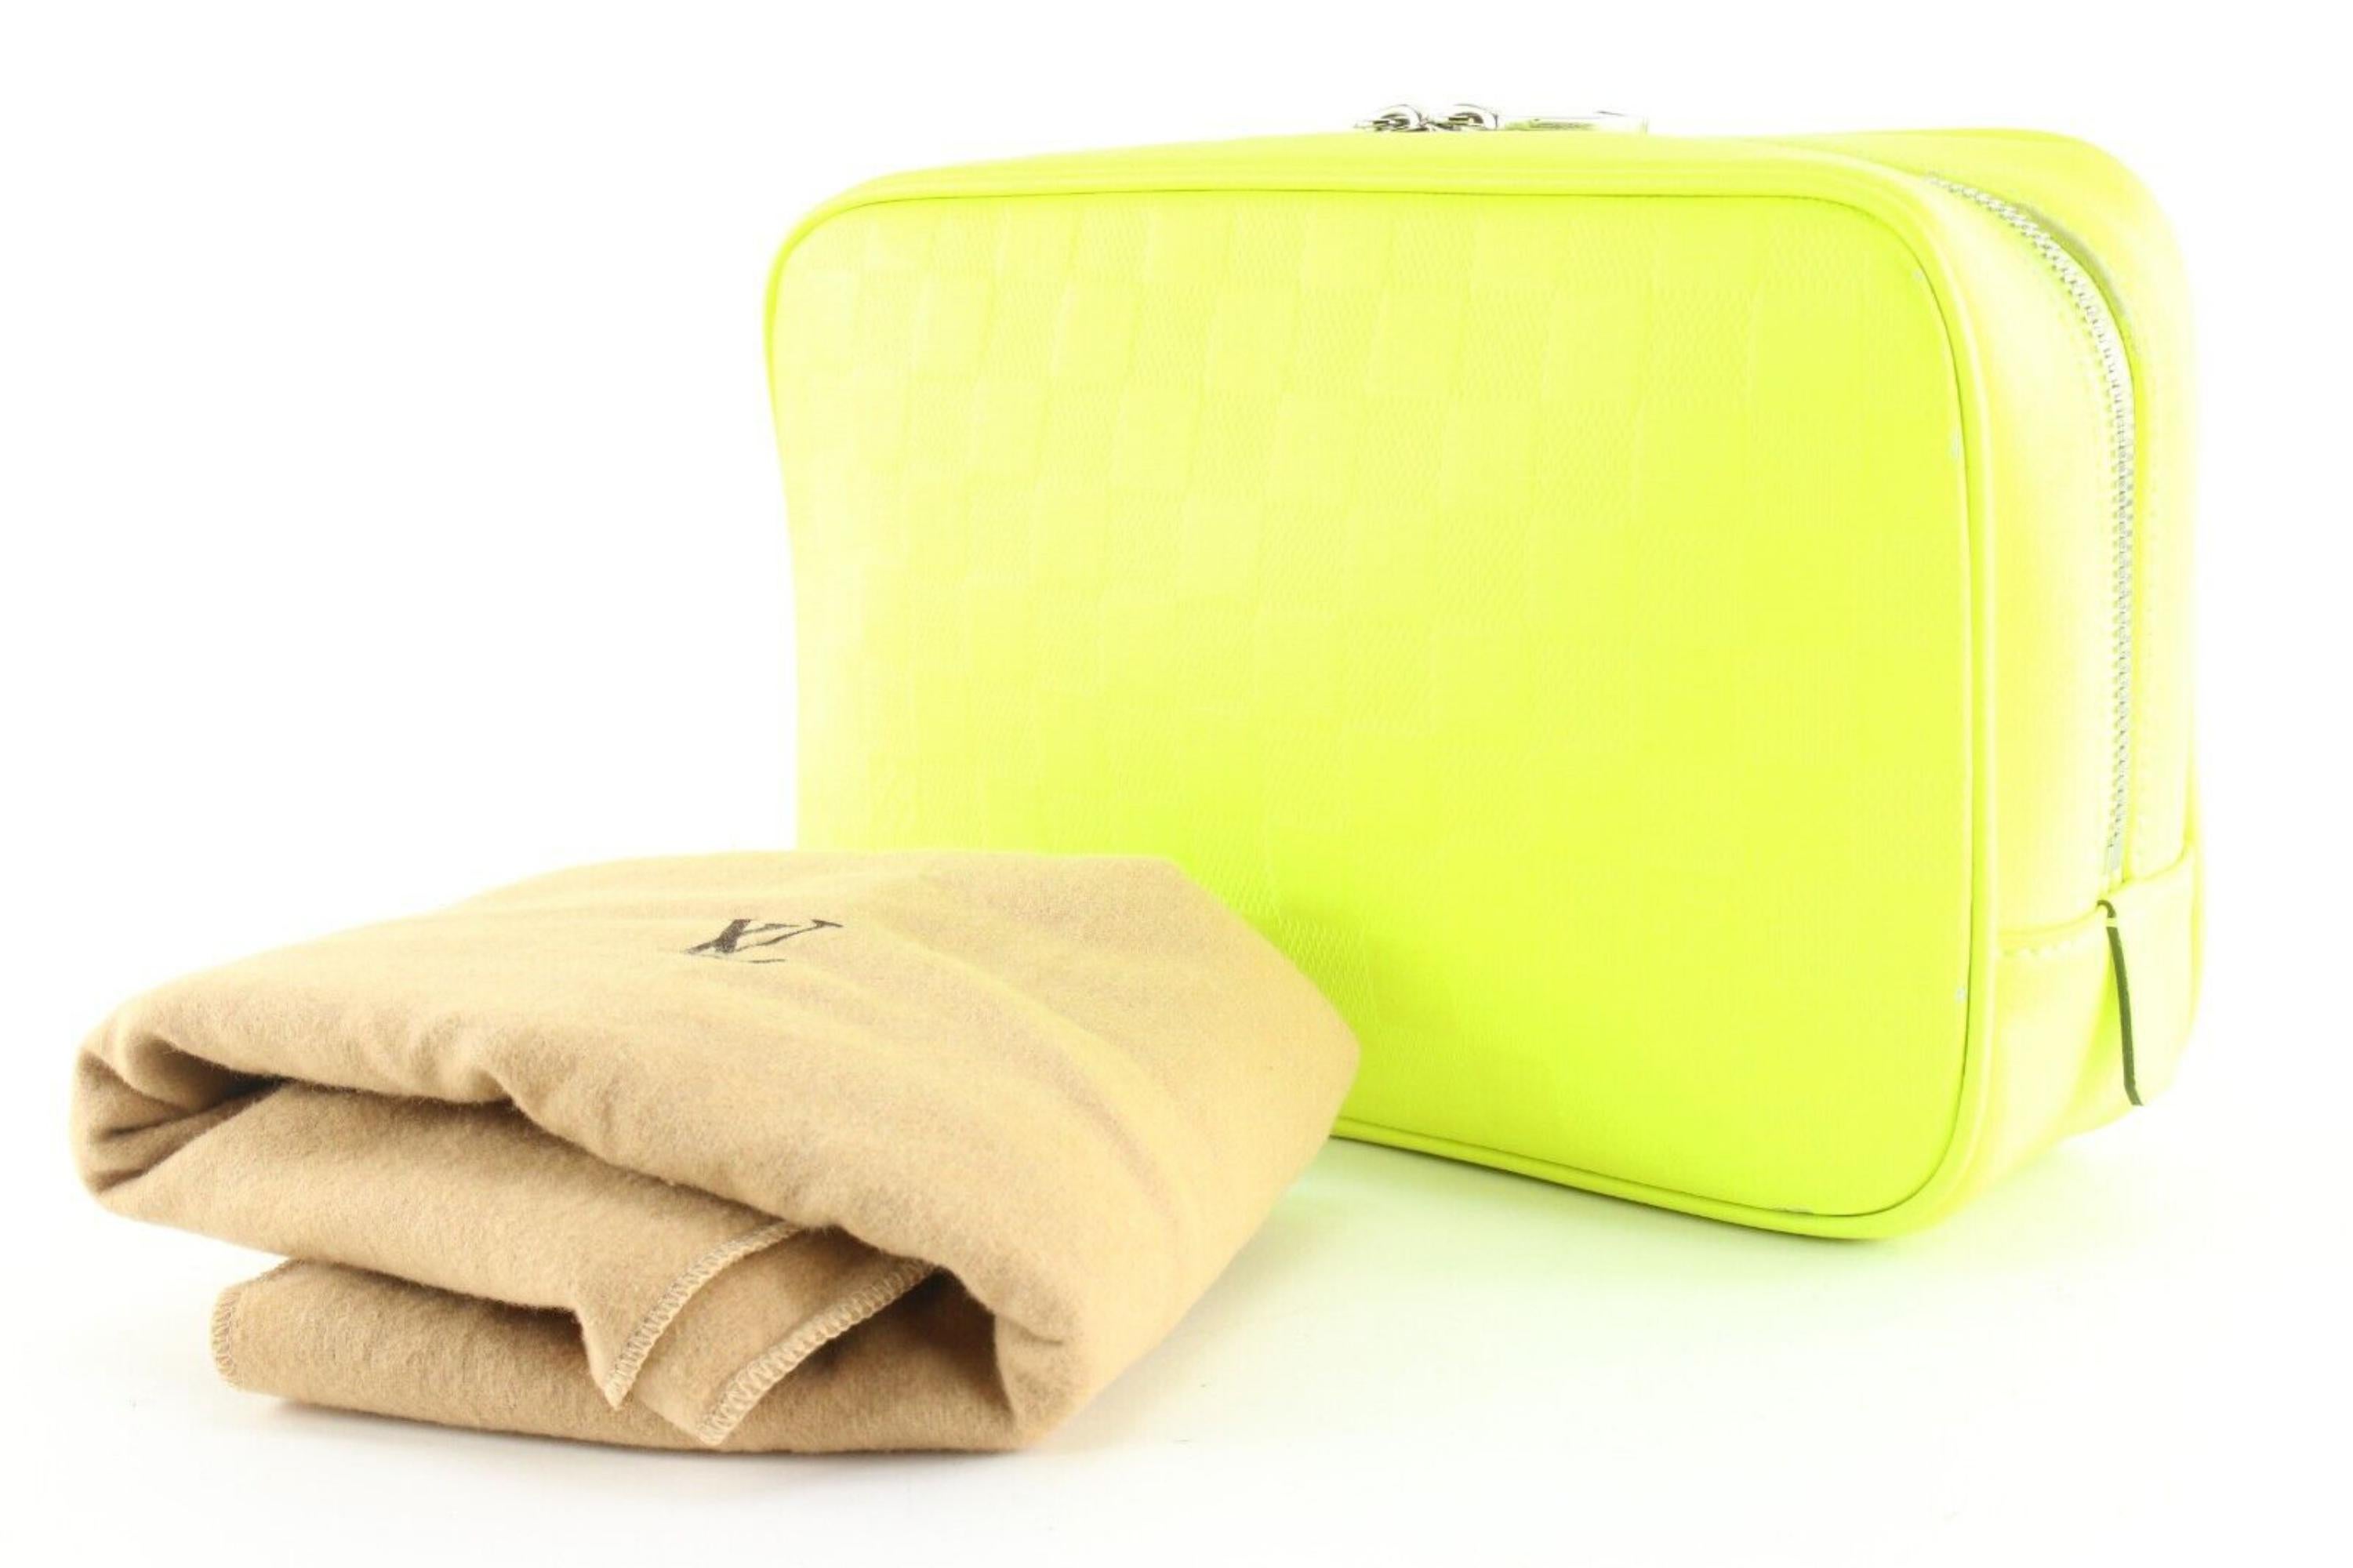 Louis Vuitton Neon Green Damier Infini Leather Trousse Cosmetic Pouch 5LK0223 For Sale 6